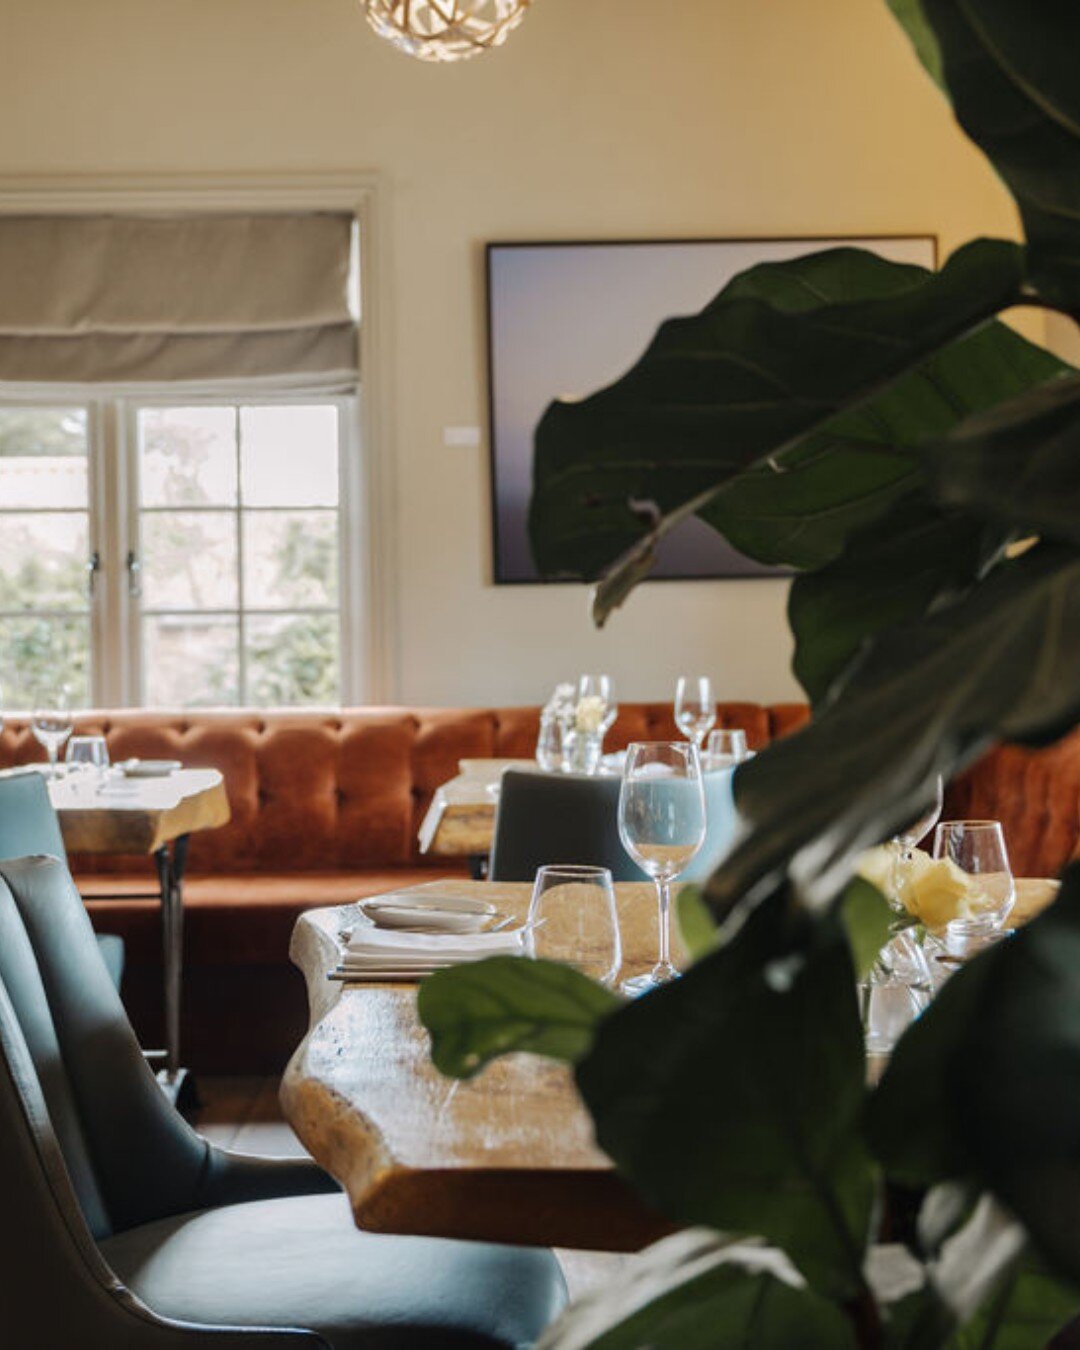 Our dining room offers a calm and neutral environment with the aim of making everyone feel relaxed and comfortable. Ready to book?

www.thewildebeest.co.uk